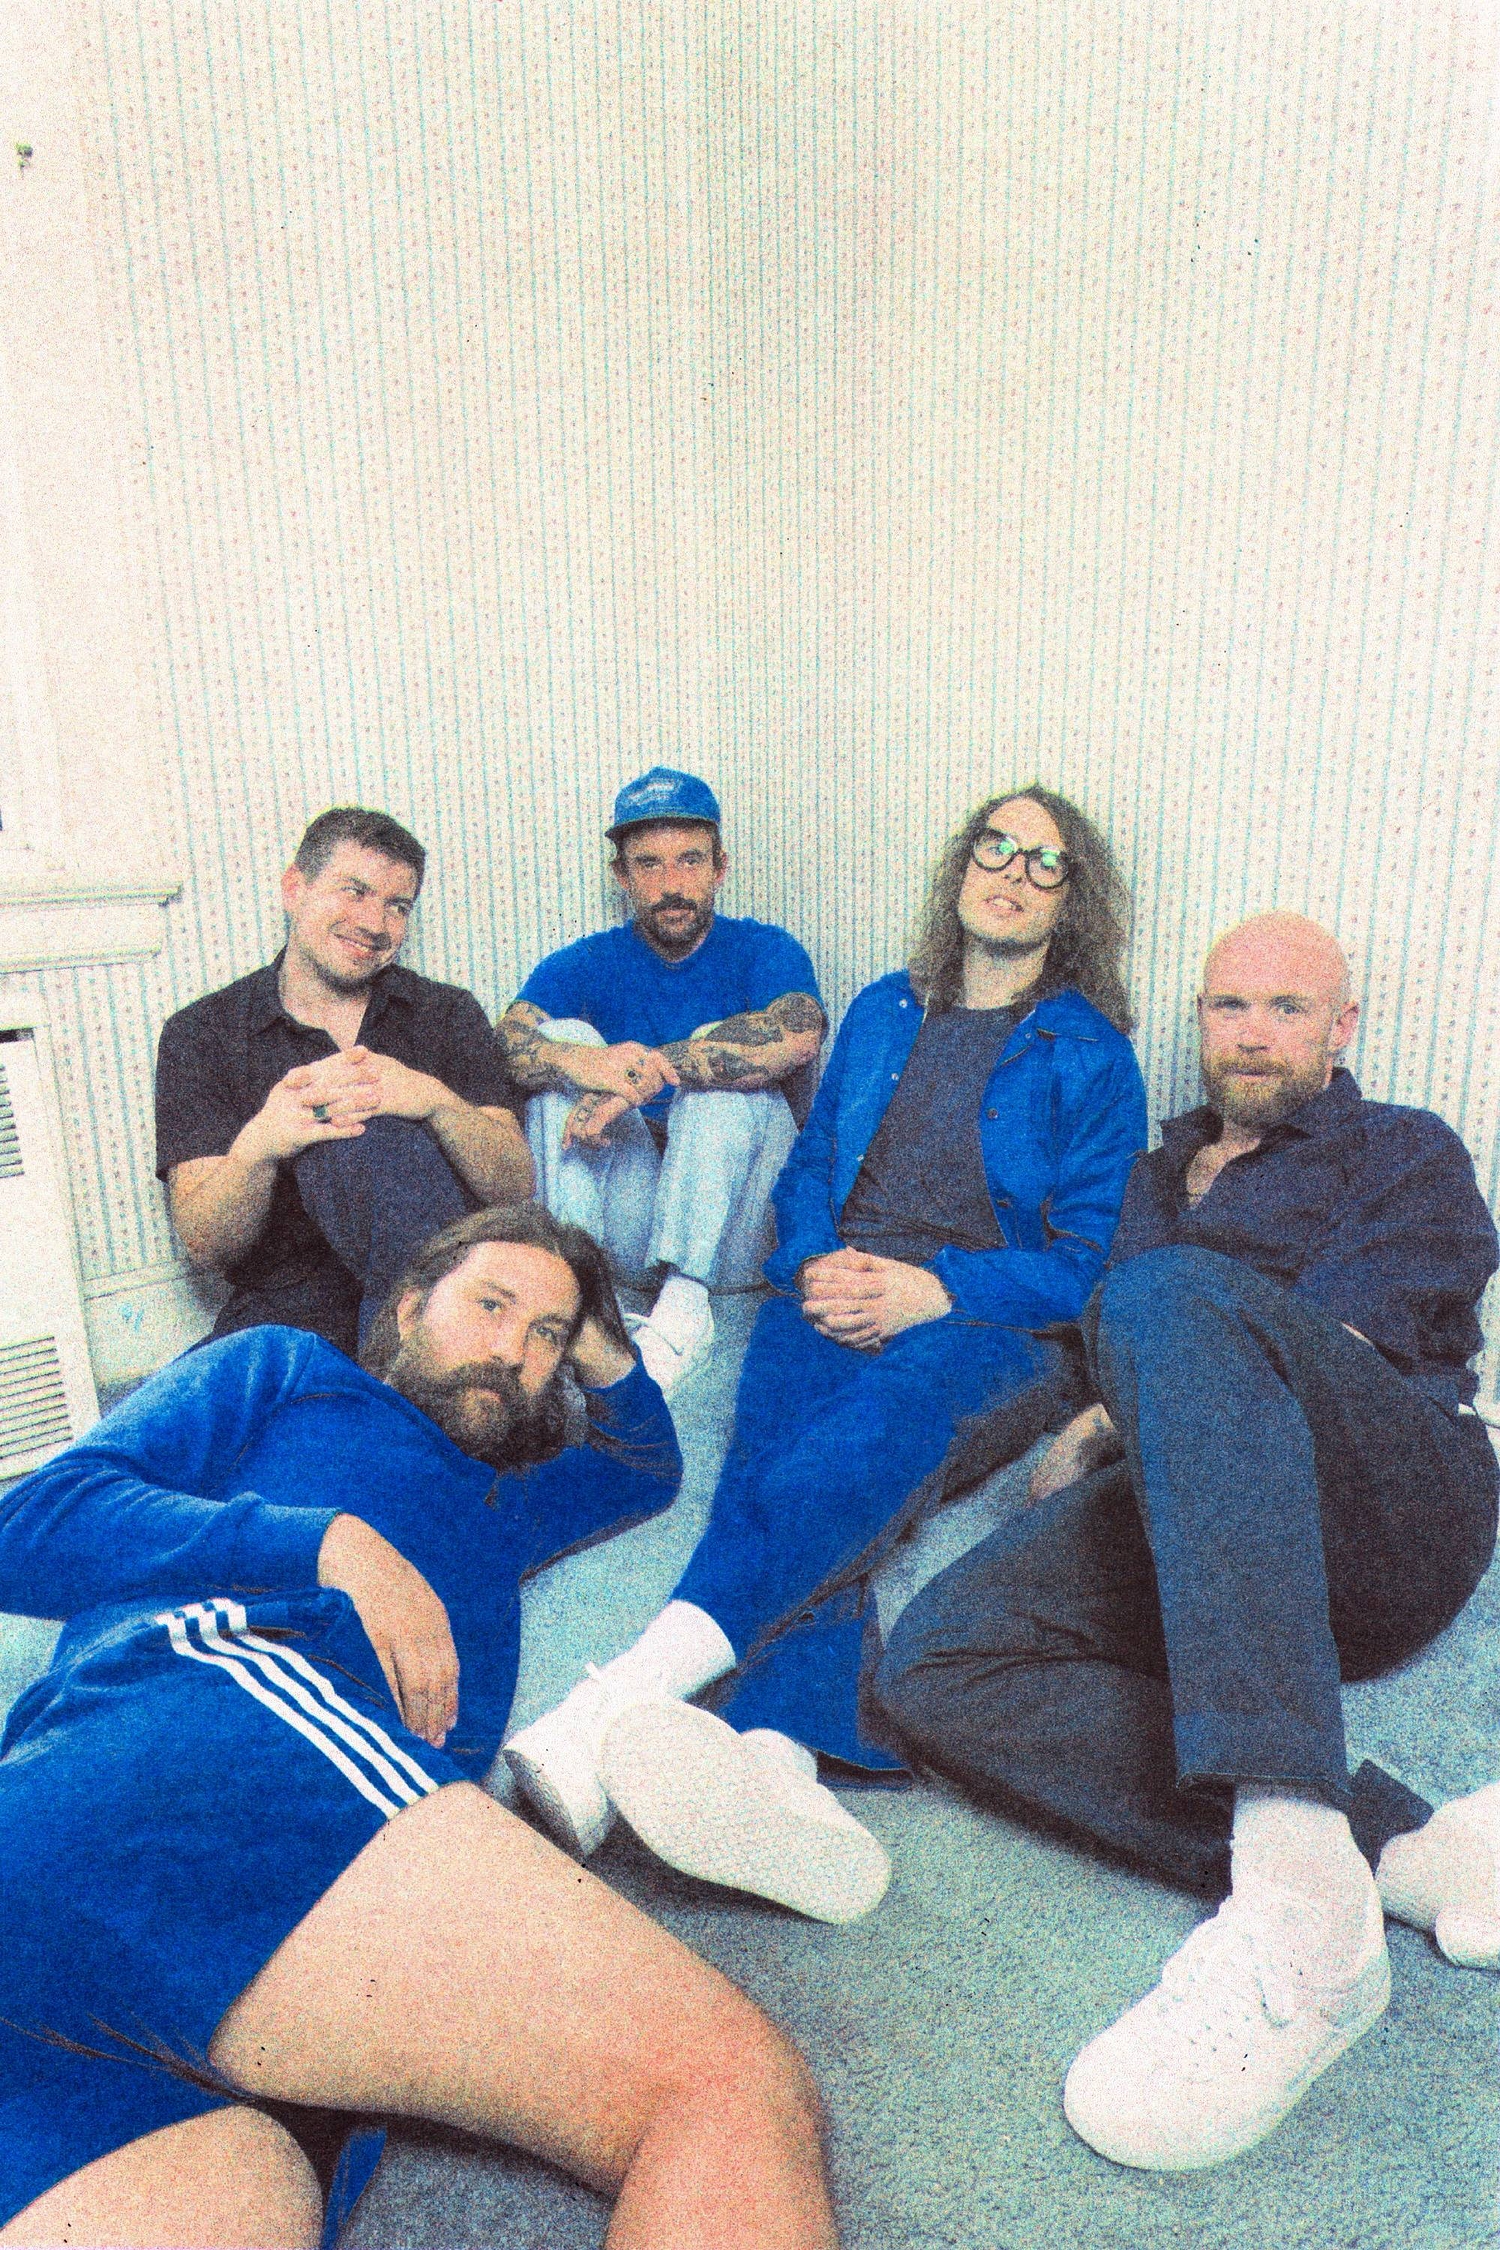 IDLES talk love, self-reflection and their fifth album 'TANGK'